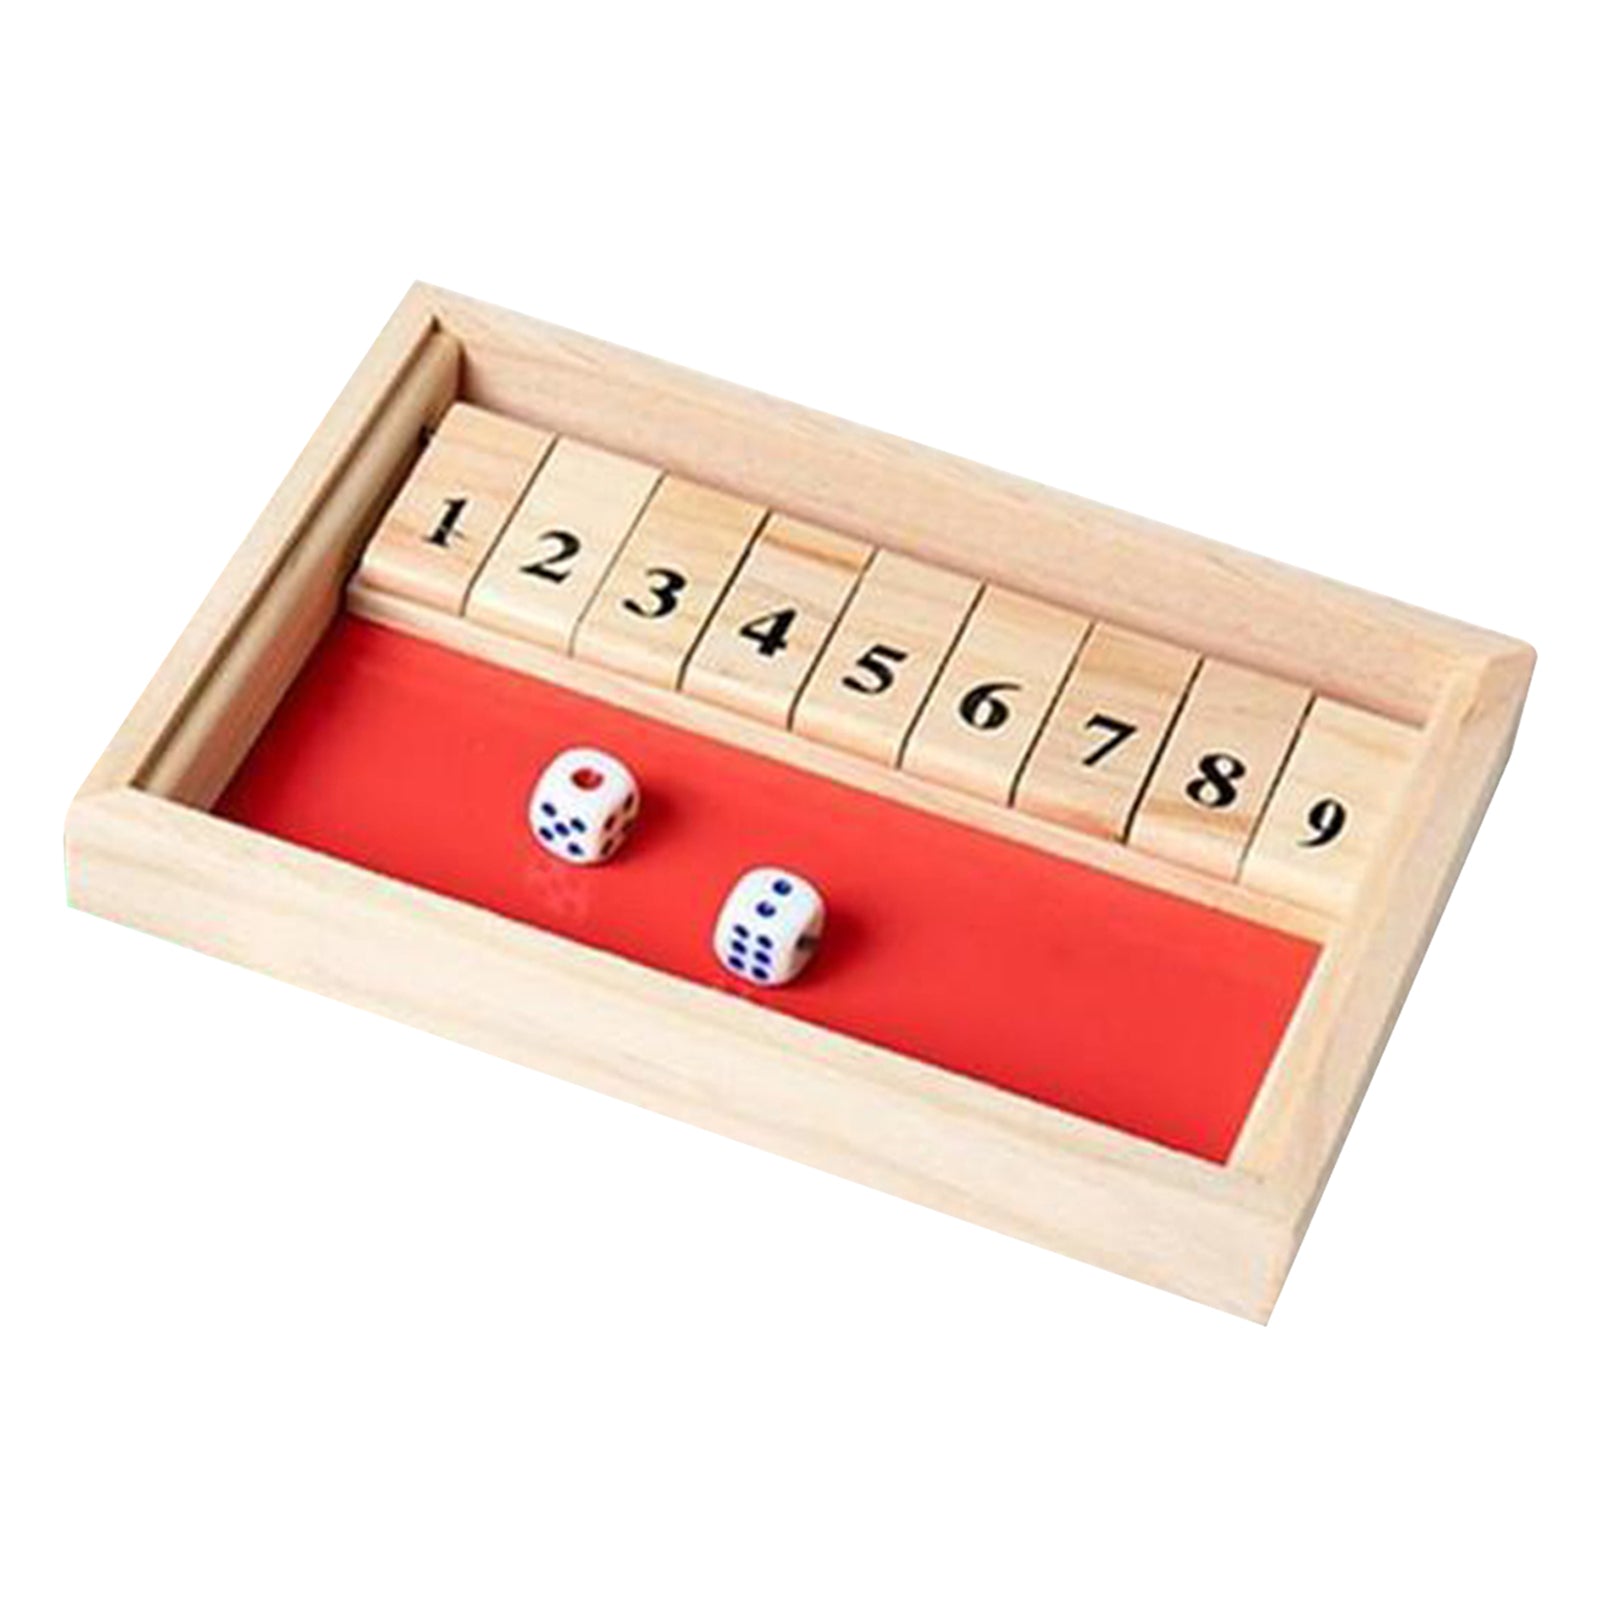 9 Numbers Shut The Box Board Game w/Dice for Bar Drinking Party Family Games